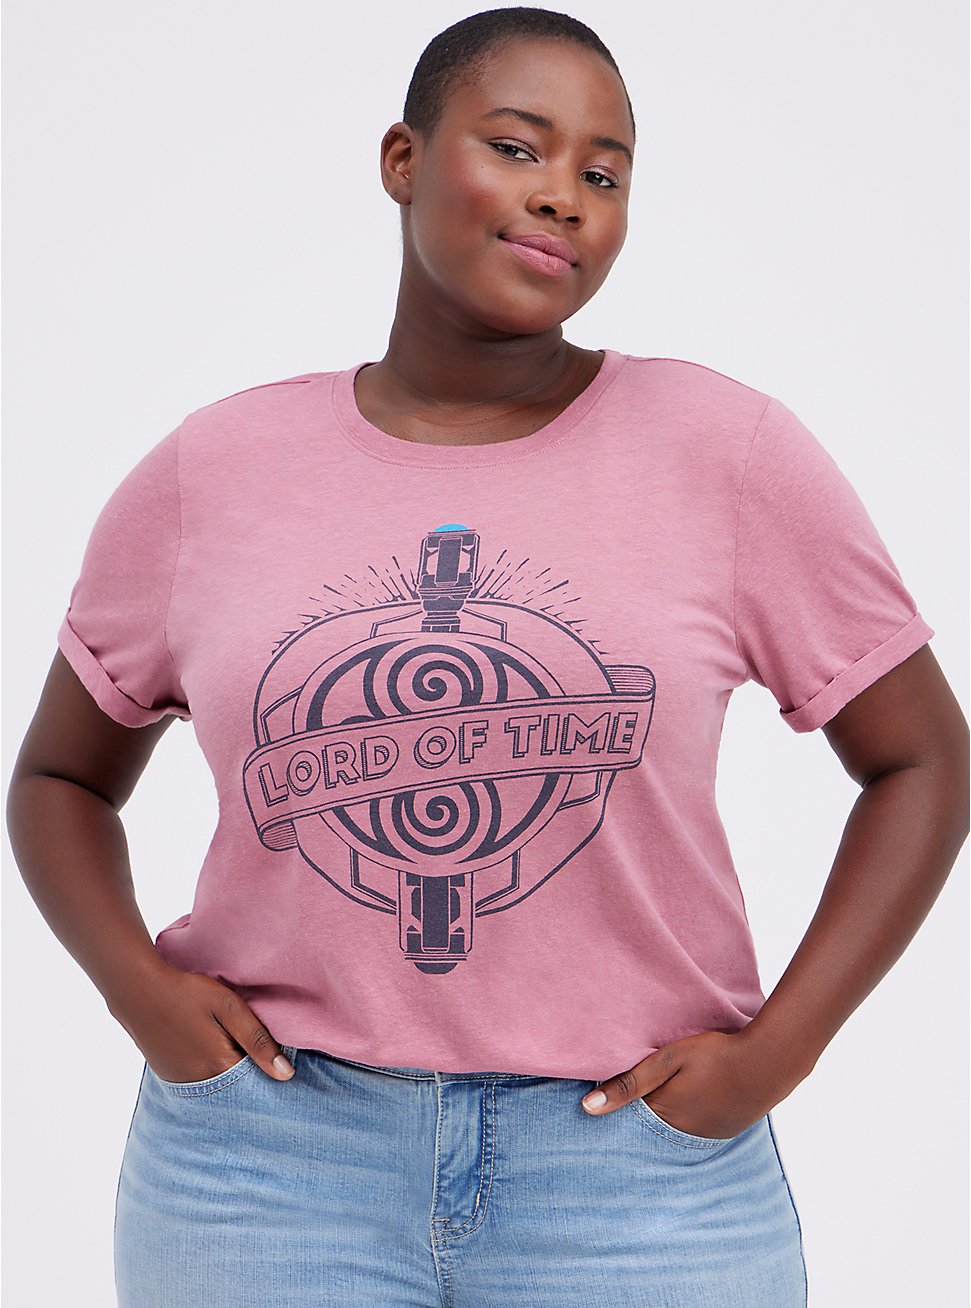 Top - Her Universe Dr. Who Lord Of Time Pink, MESA ROSA, hi-res